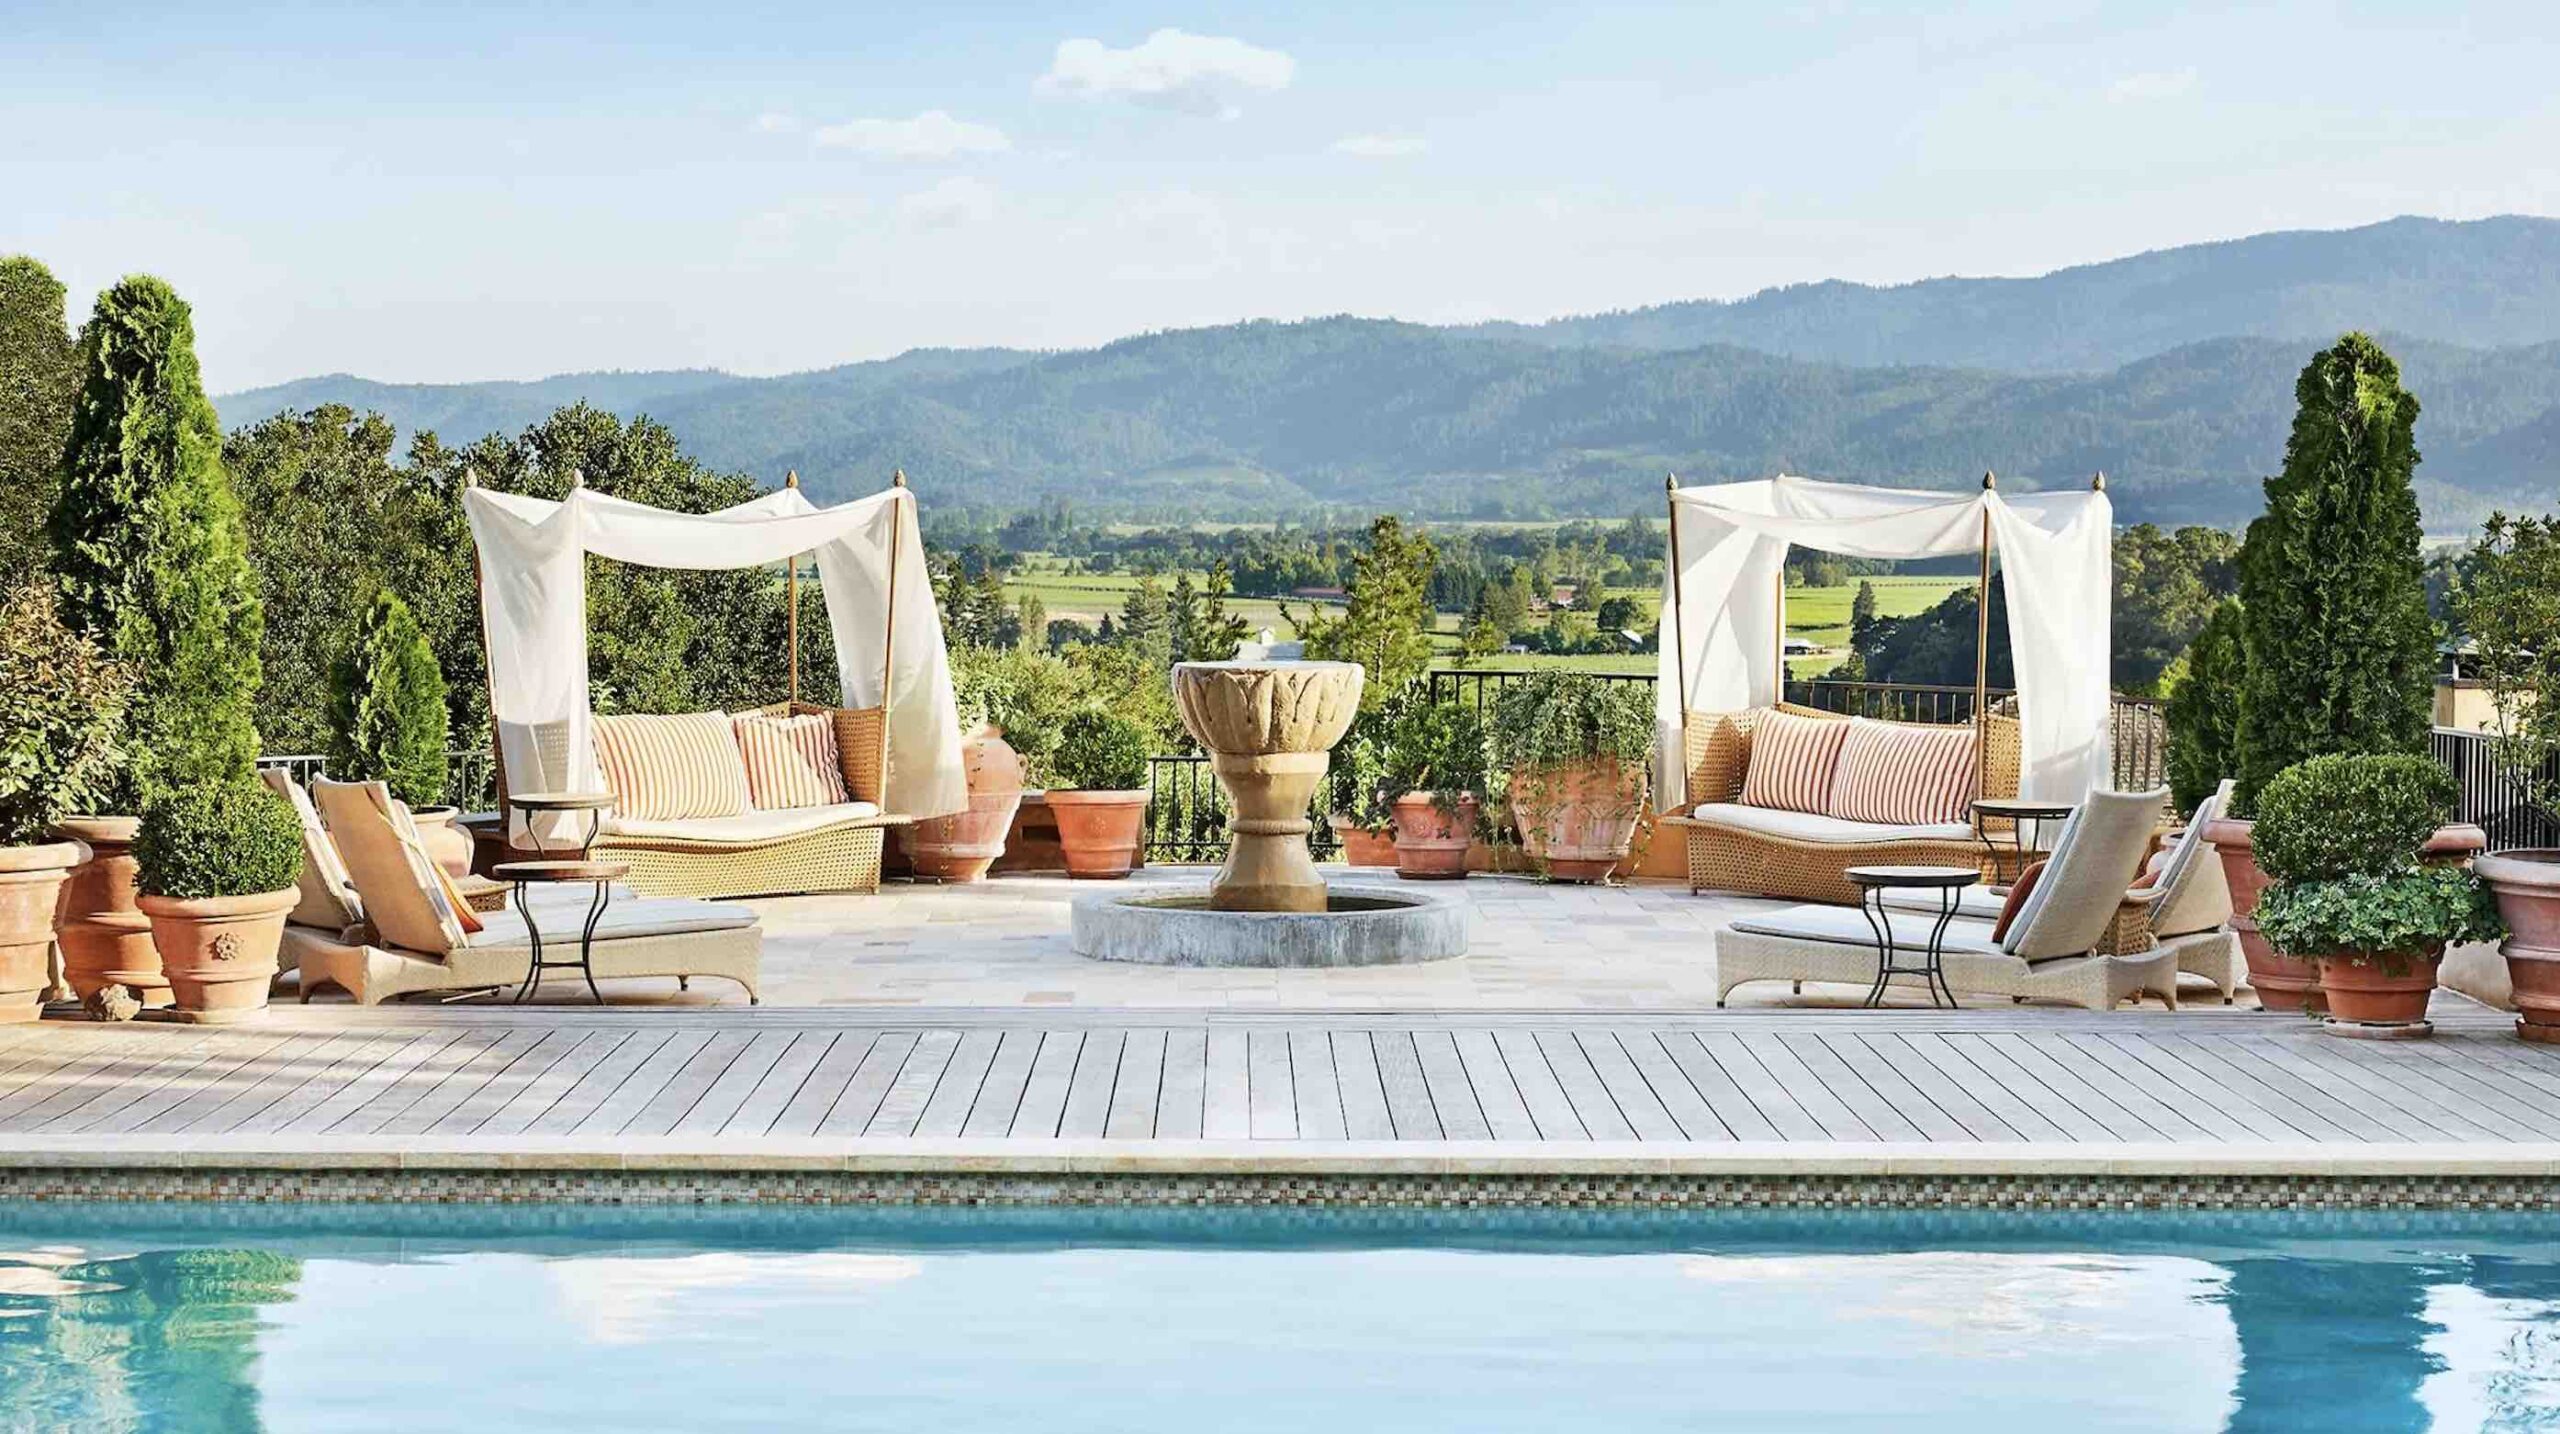 Auberge du Soleil pools and loungers at one of the best luxury hotels in Napa CA